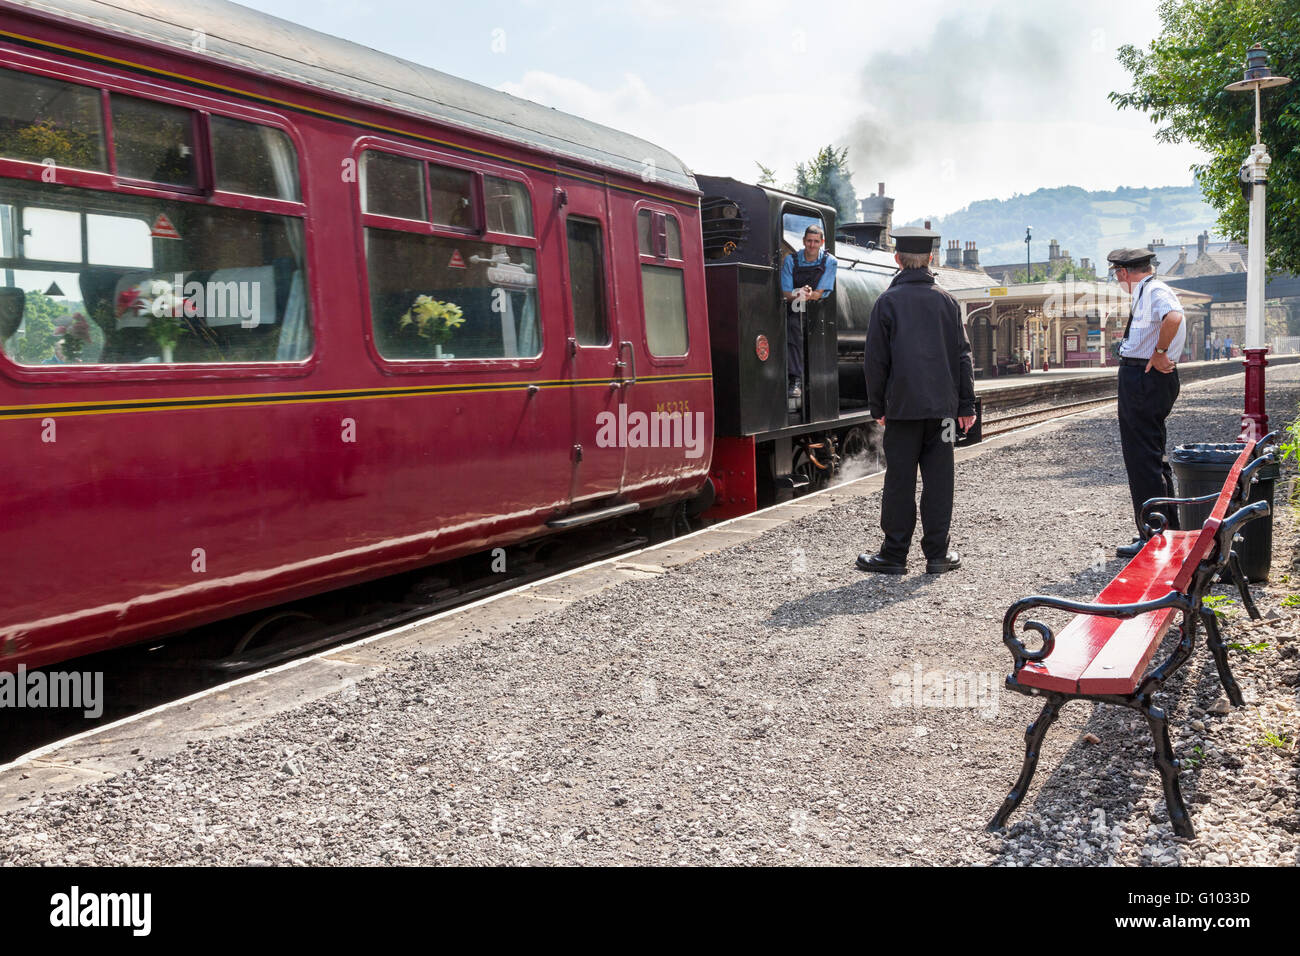 Volunteer workers for Peak Rail, a heritage railway, watch as a steam train is departing at Matlock Railway Station, Derbyshire, UK Stock Photo